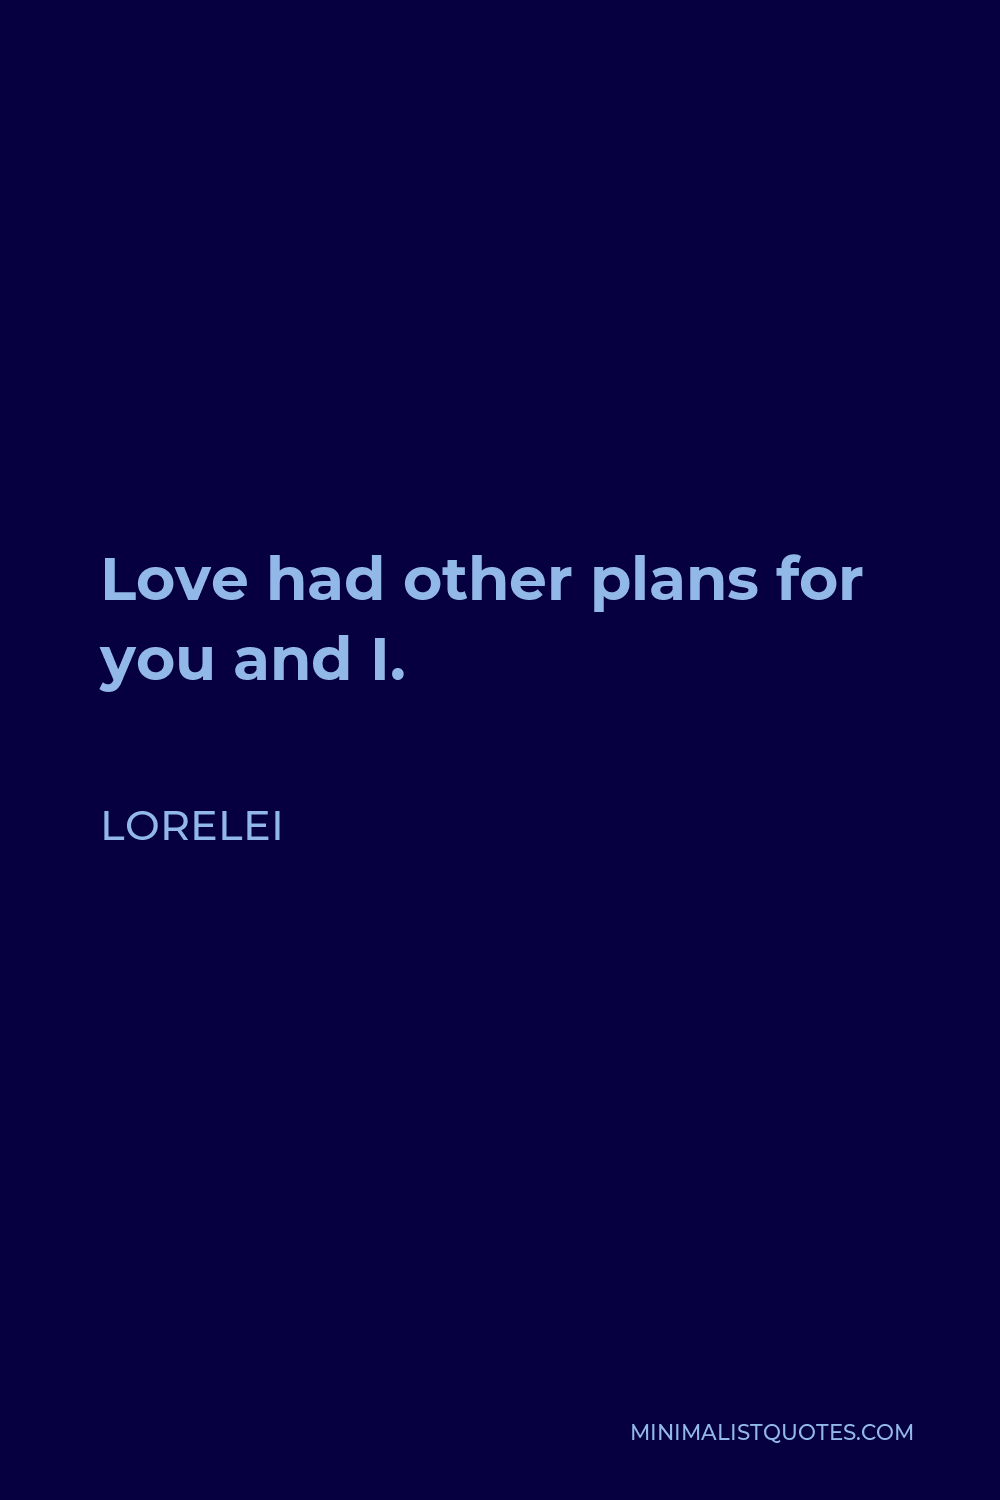 Lorelei Quote - Love had other plans for you and I.